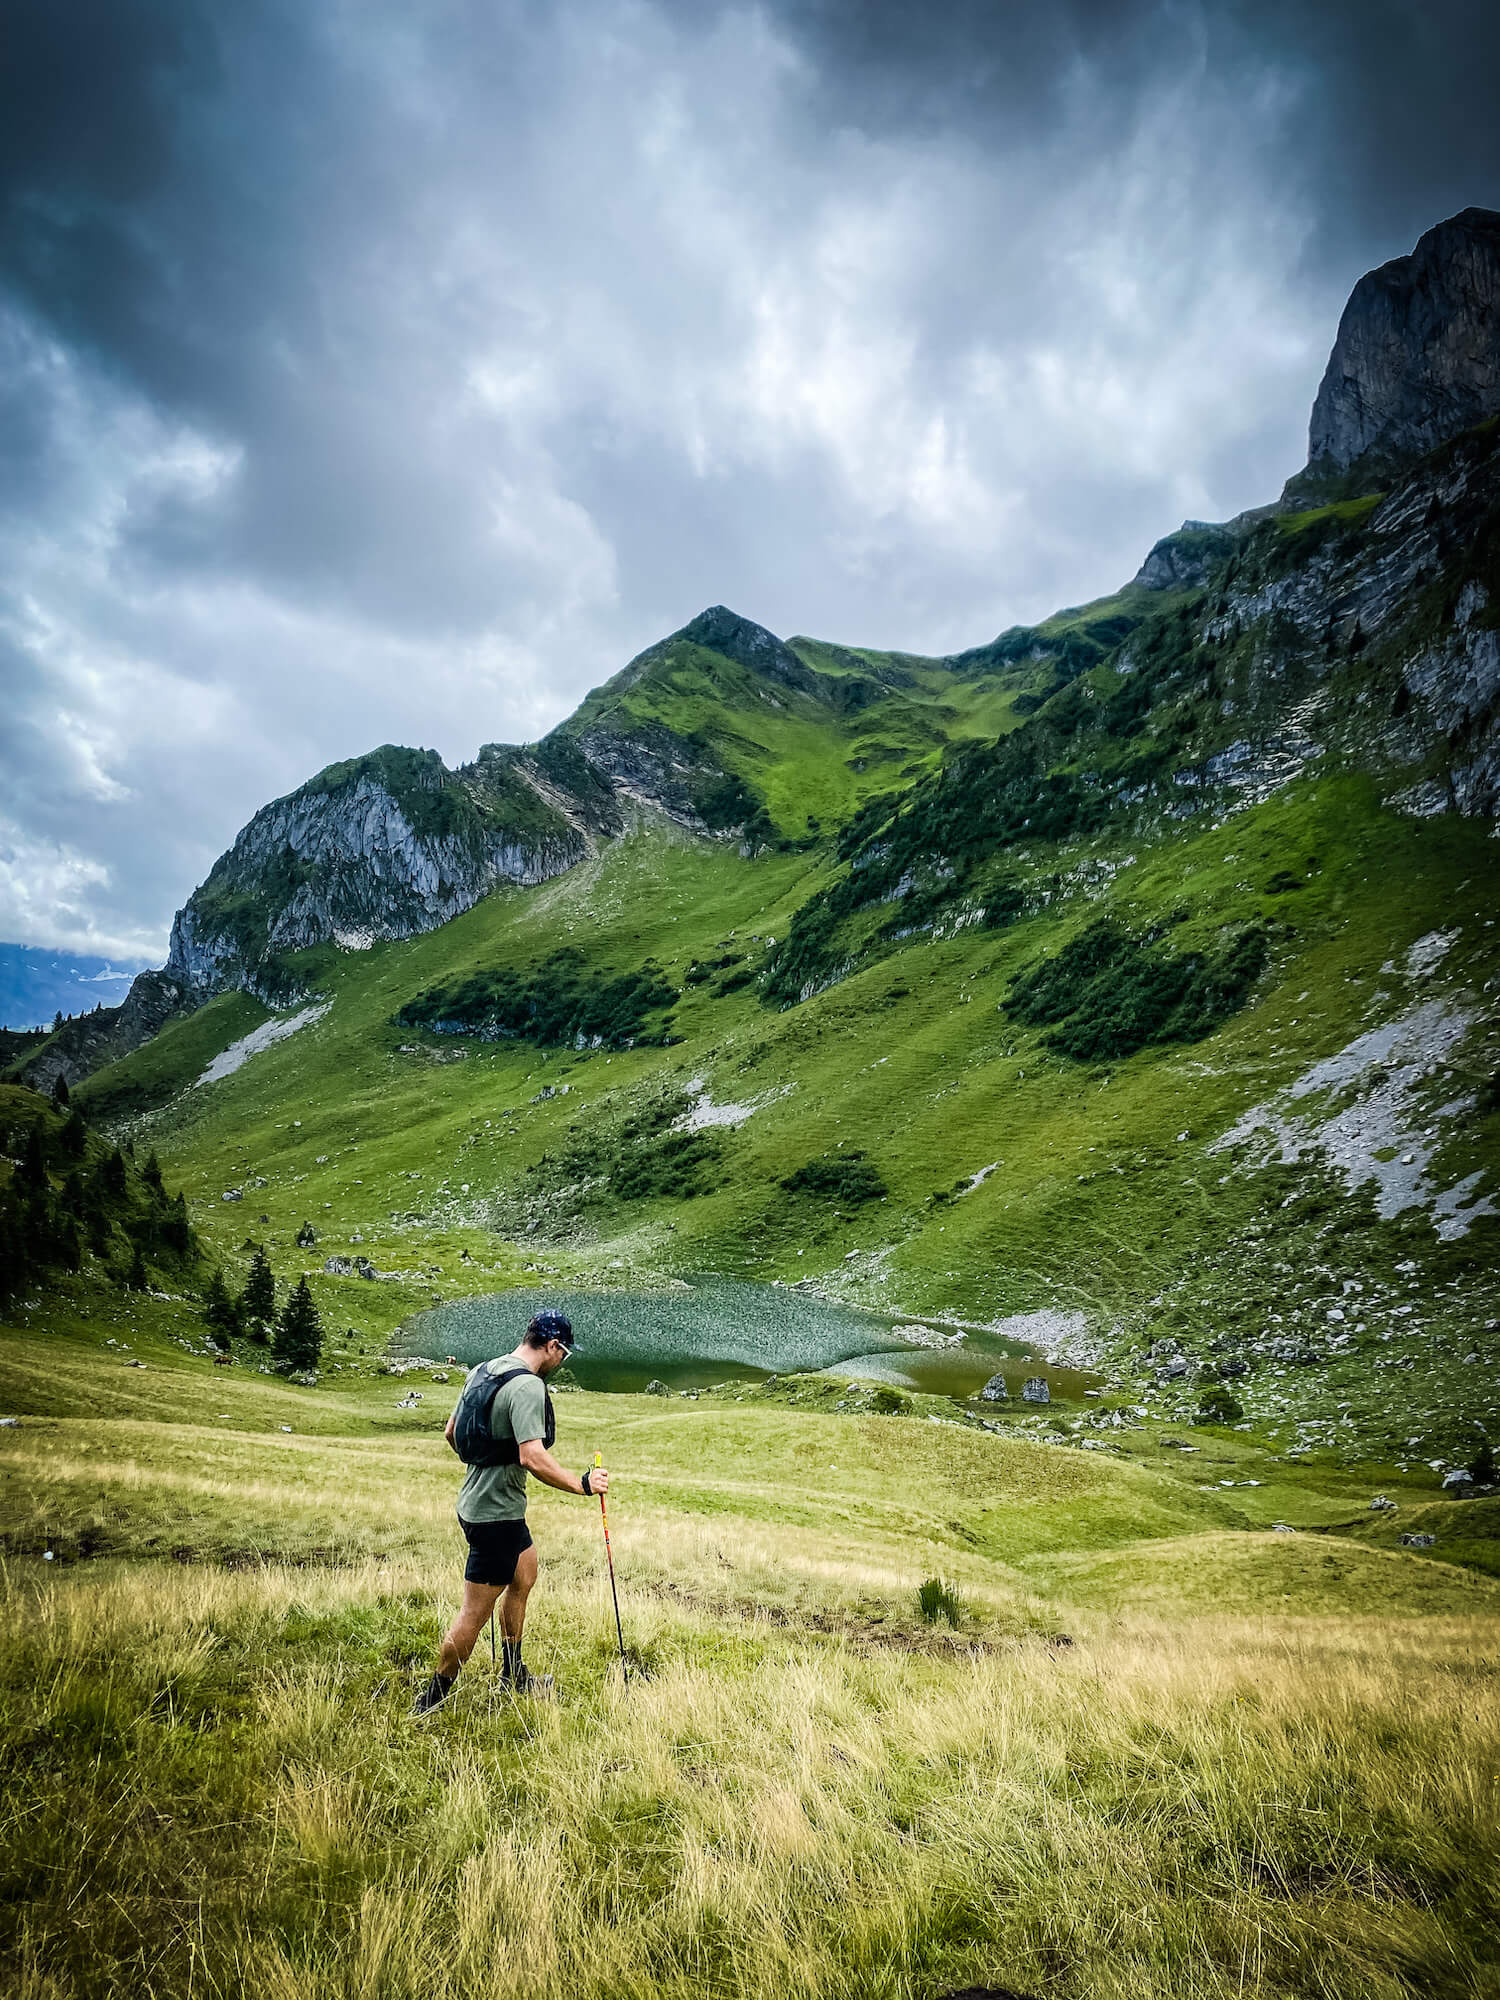 Hiker walking through grass field in the mountains in front of alpine lake.